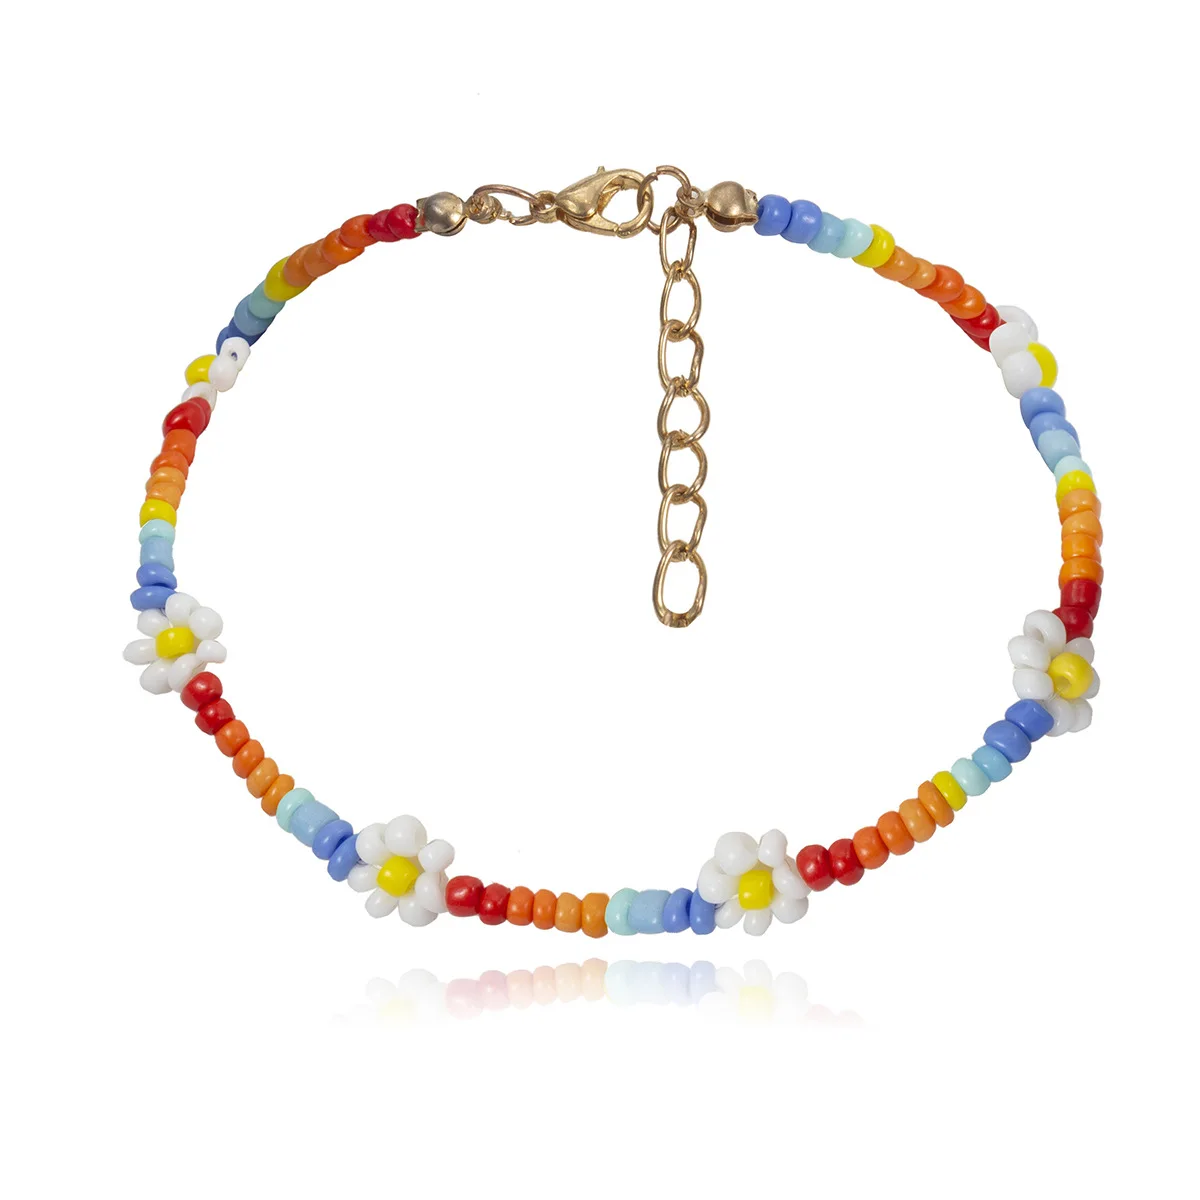 Personality color beaded ethnic necklace with creative beaded beaded flowers and geometric necklace bracelet anklets